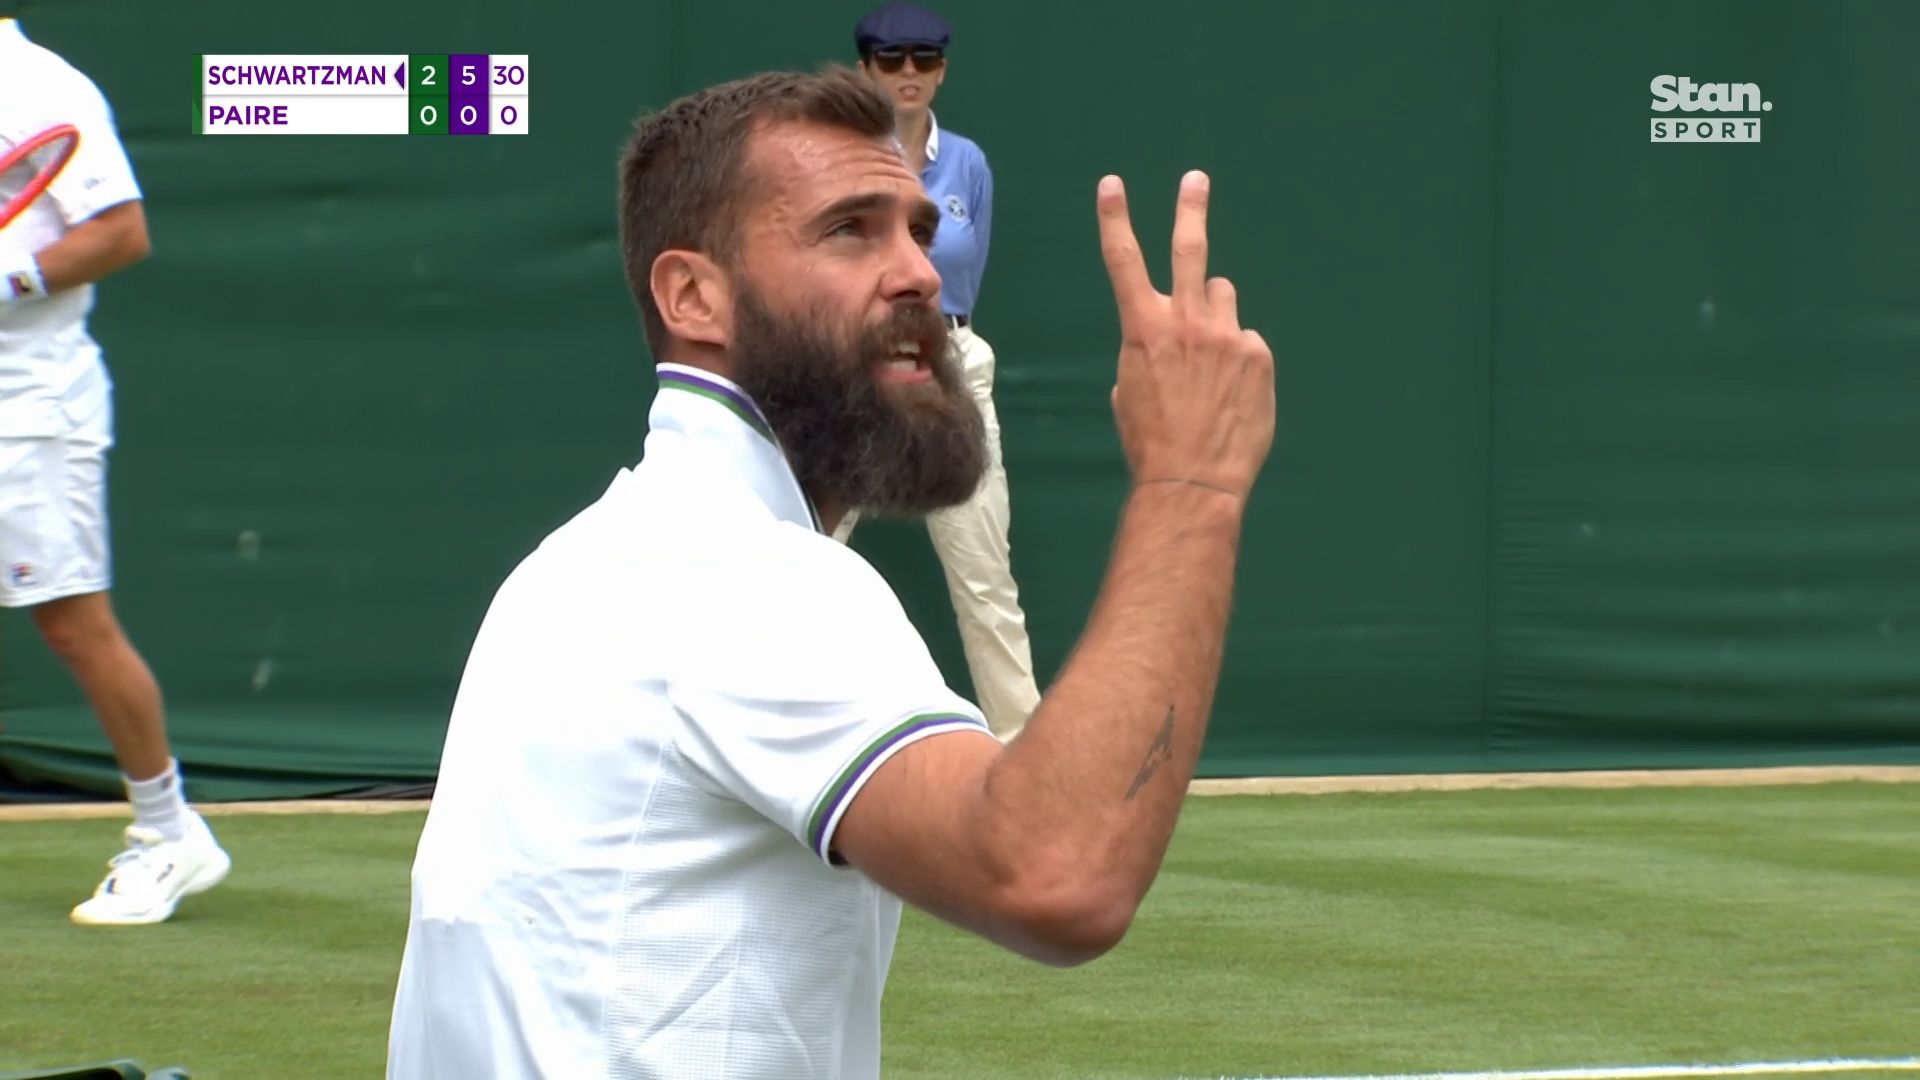 Benoit Paire warned for not trying at Wimbledon as fan calls out Frenchman